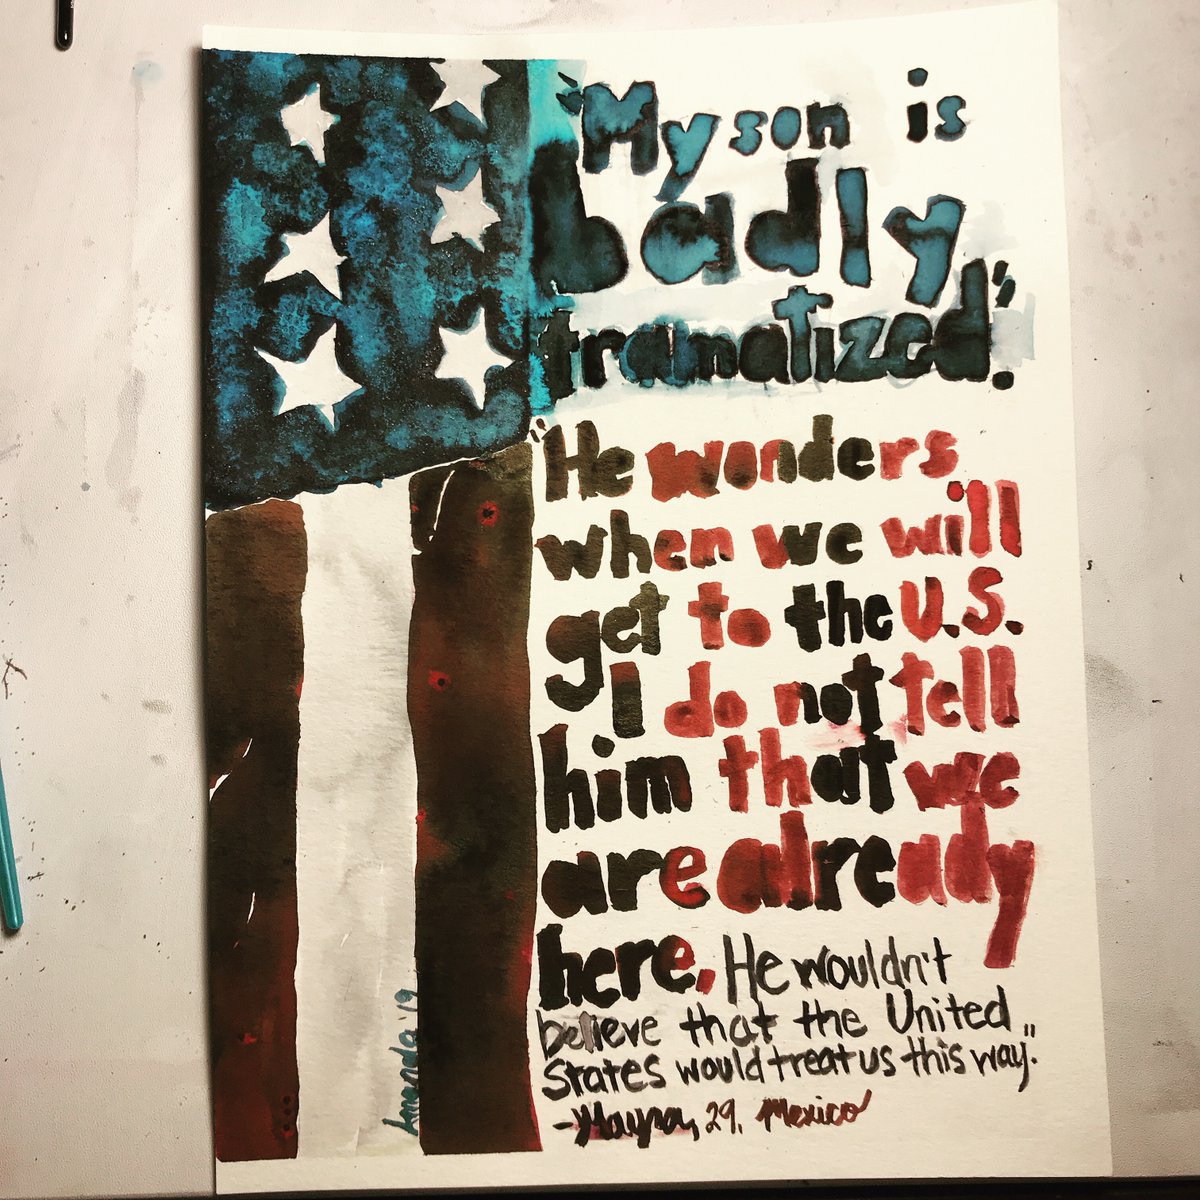 Day 20: “My son is badly traumatized...He wonders when we will get to the United States. I do not tell him that we are already here. He wouldn’t believe that the United States would treat us this way.”Full story:  https://nomorekidsincages.wordpress.com/2019/10/04/day-20-august-7-2019/FB: https://www.facebook.com/nomorekidsincages/photos/a.109074520473670/109253117122477/?type=3&theater